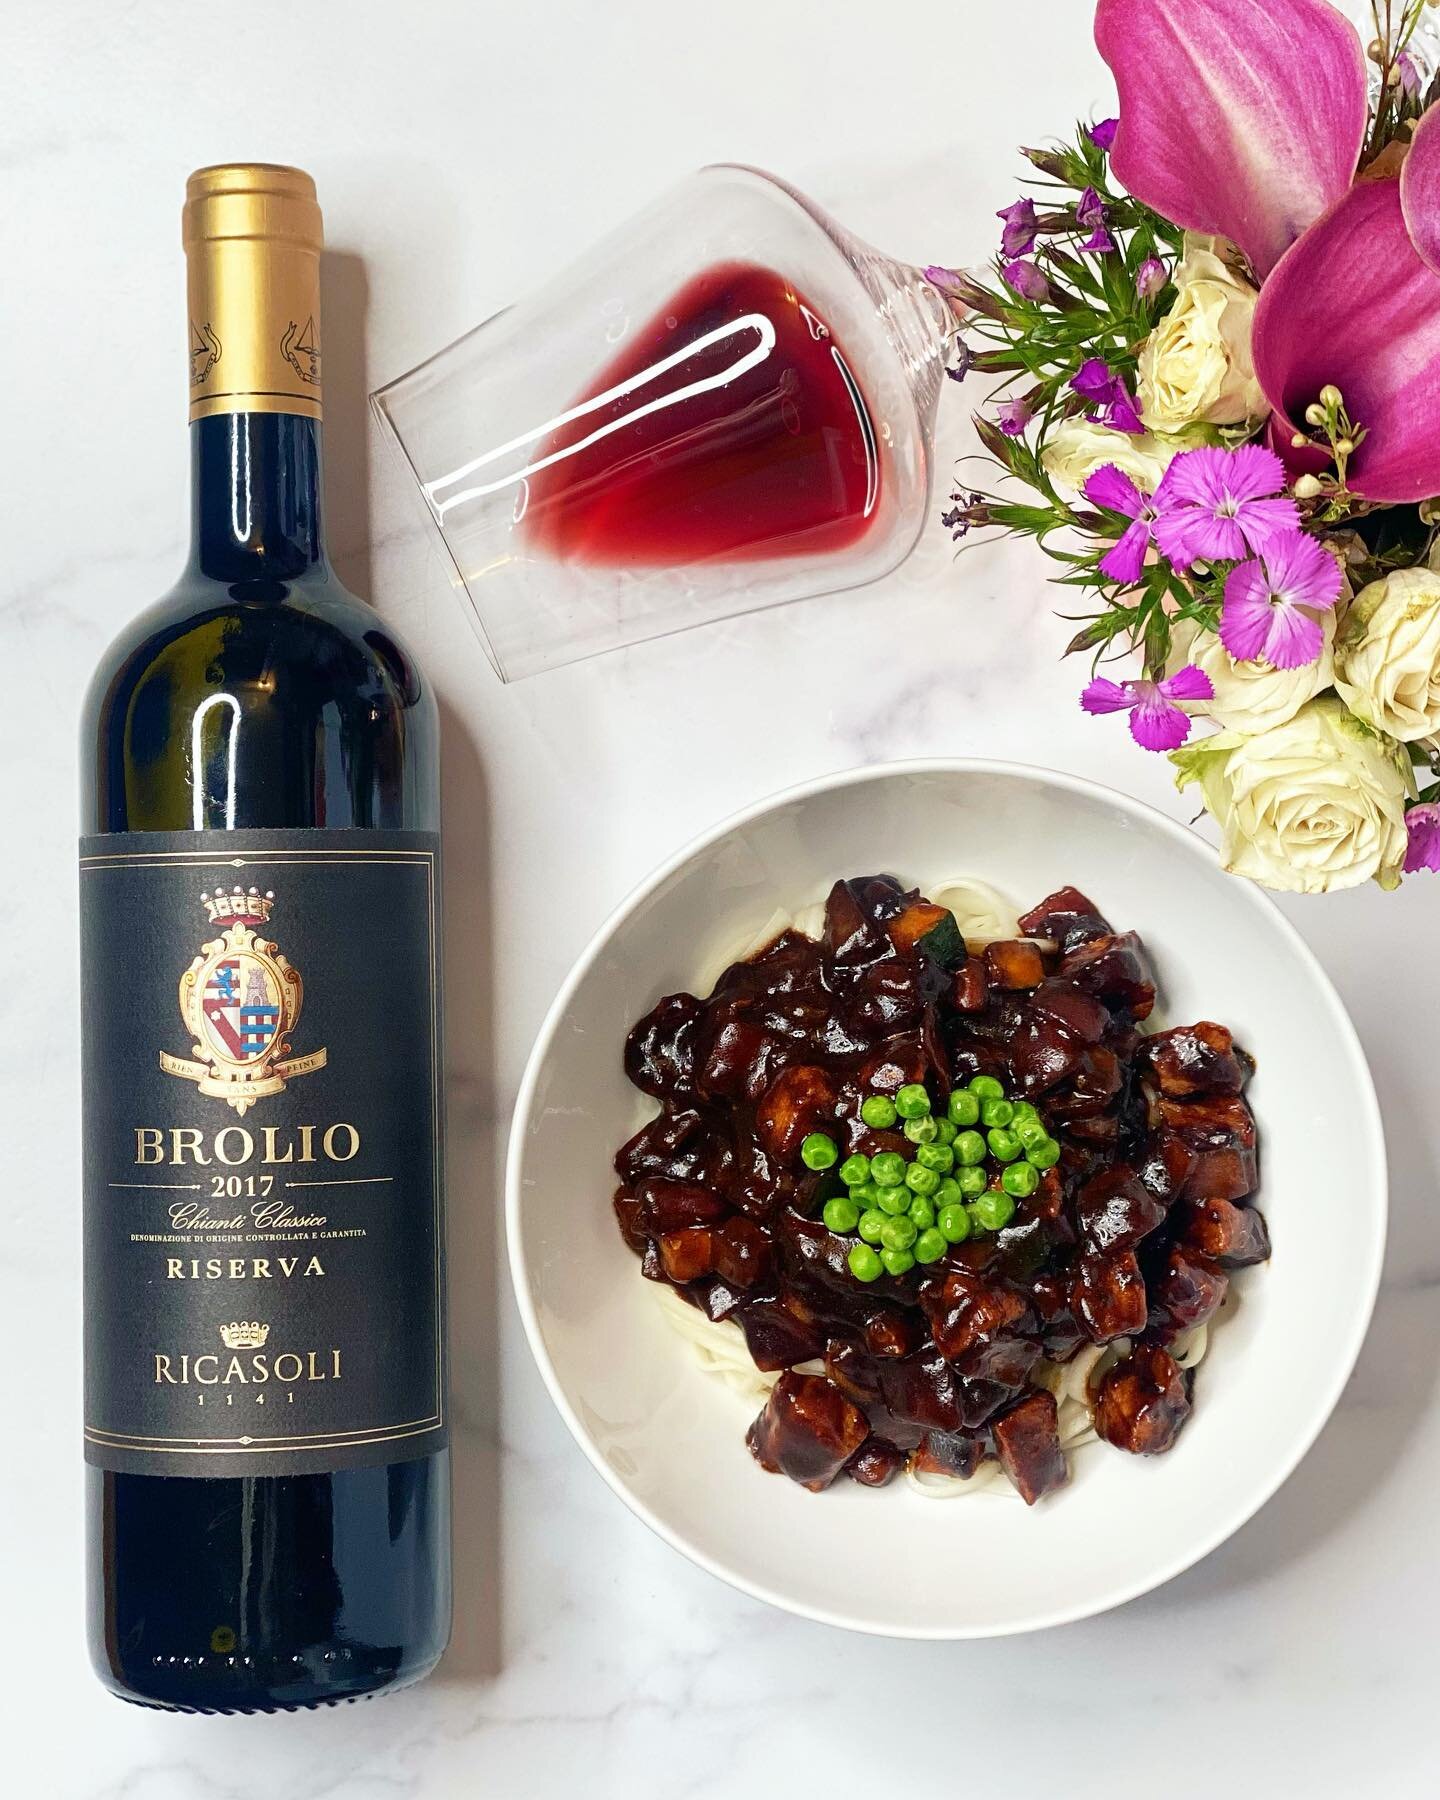 Happy Friday, everyone. Today happens to be #NationalChiantiDay. 🎉🍷🎉
&nbsp;
In celebration of this #wineholiday, I&rsquo;m having a bowl of #jajangmyeon and a glass of ricasoli1141 Brolio Chianti Classico Riserva 2017 😉
&nbsp;
Ricasoli, traced ba